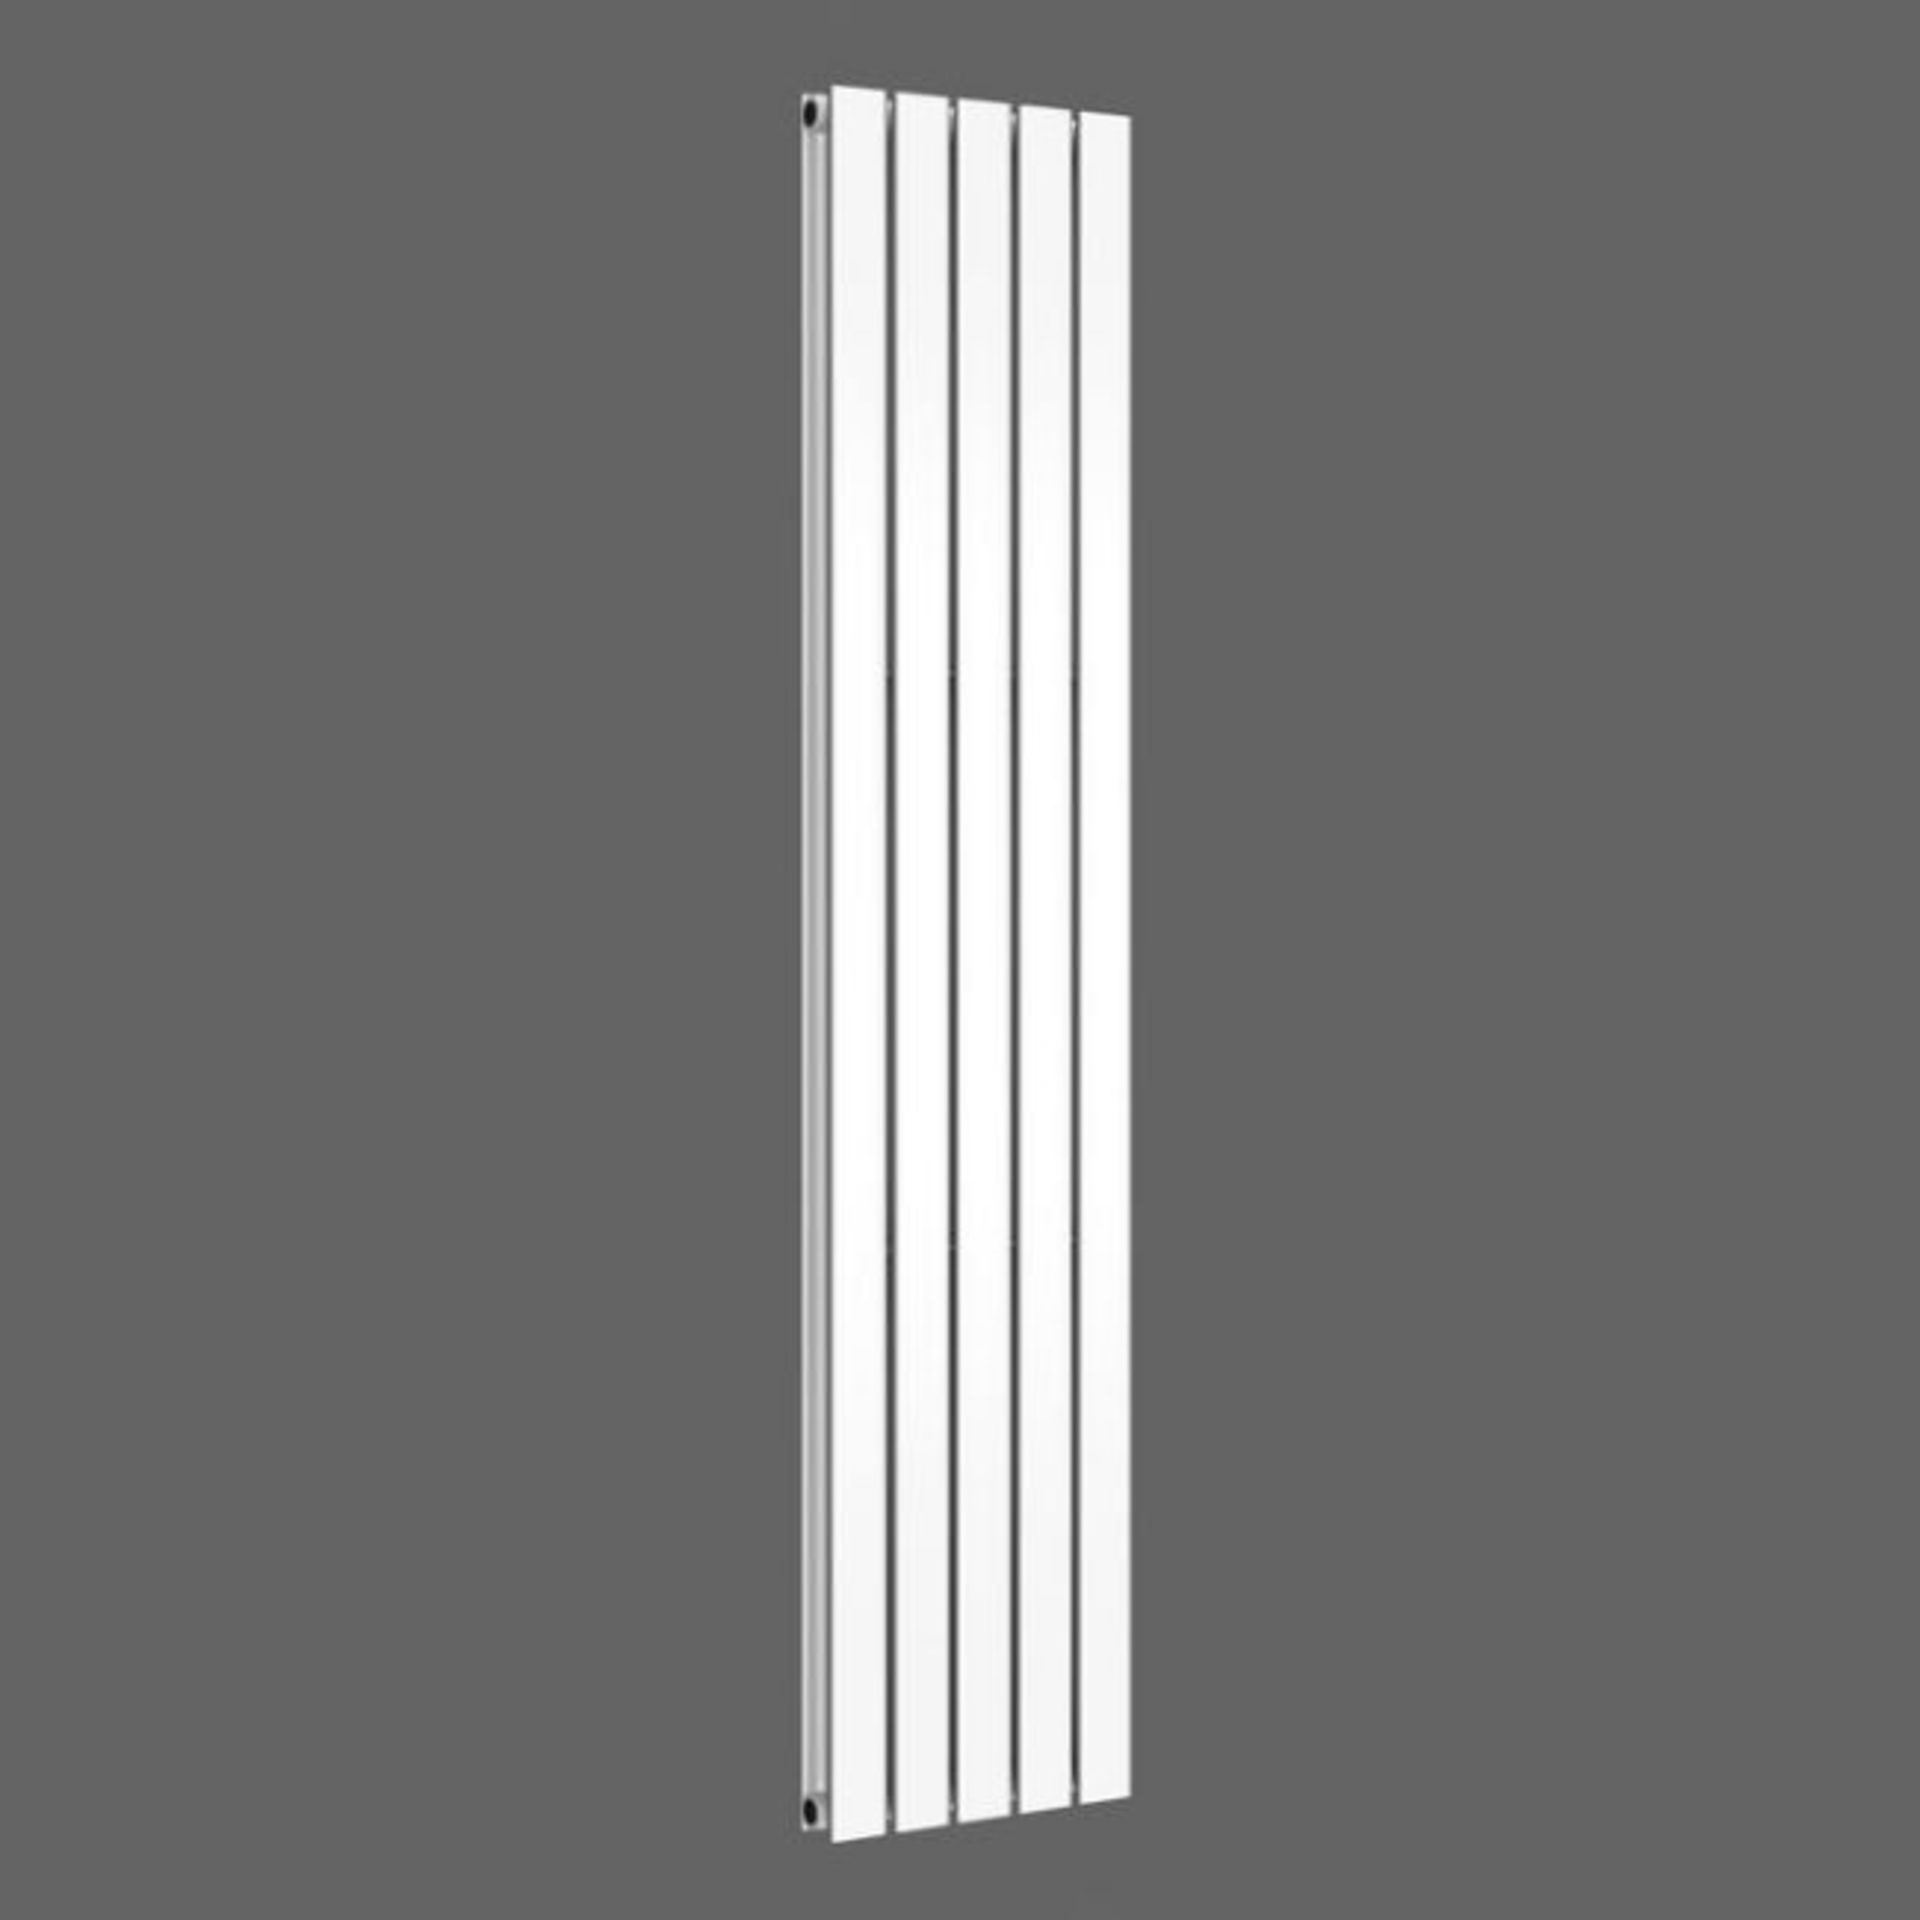 1800x480mm Gloss White Double Flat Panel Vertical Radiator. RRP £449.99.Ultra-modern in design we - Image 2 of 2